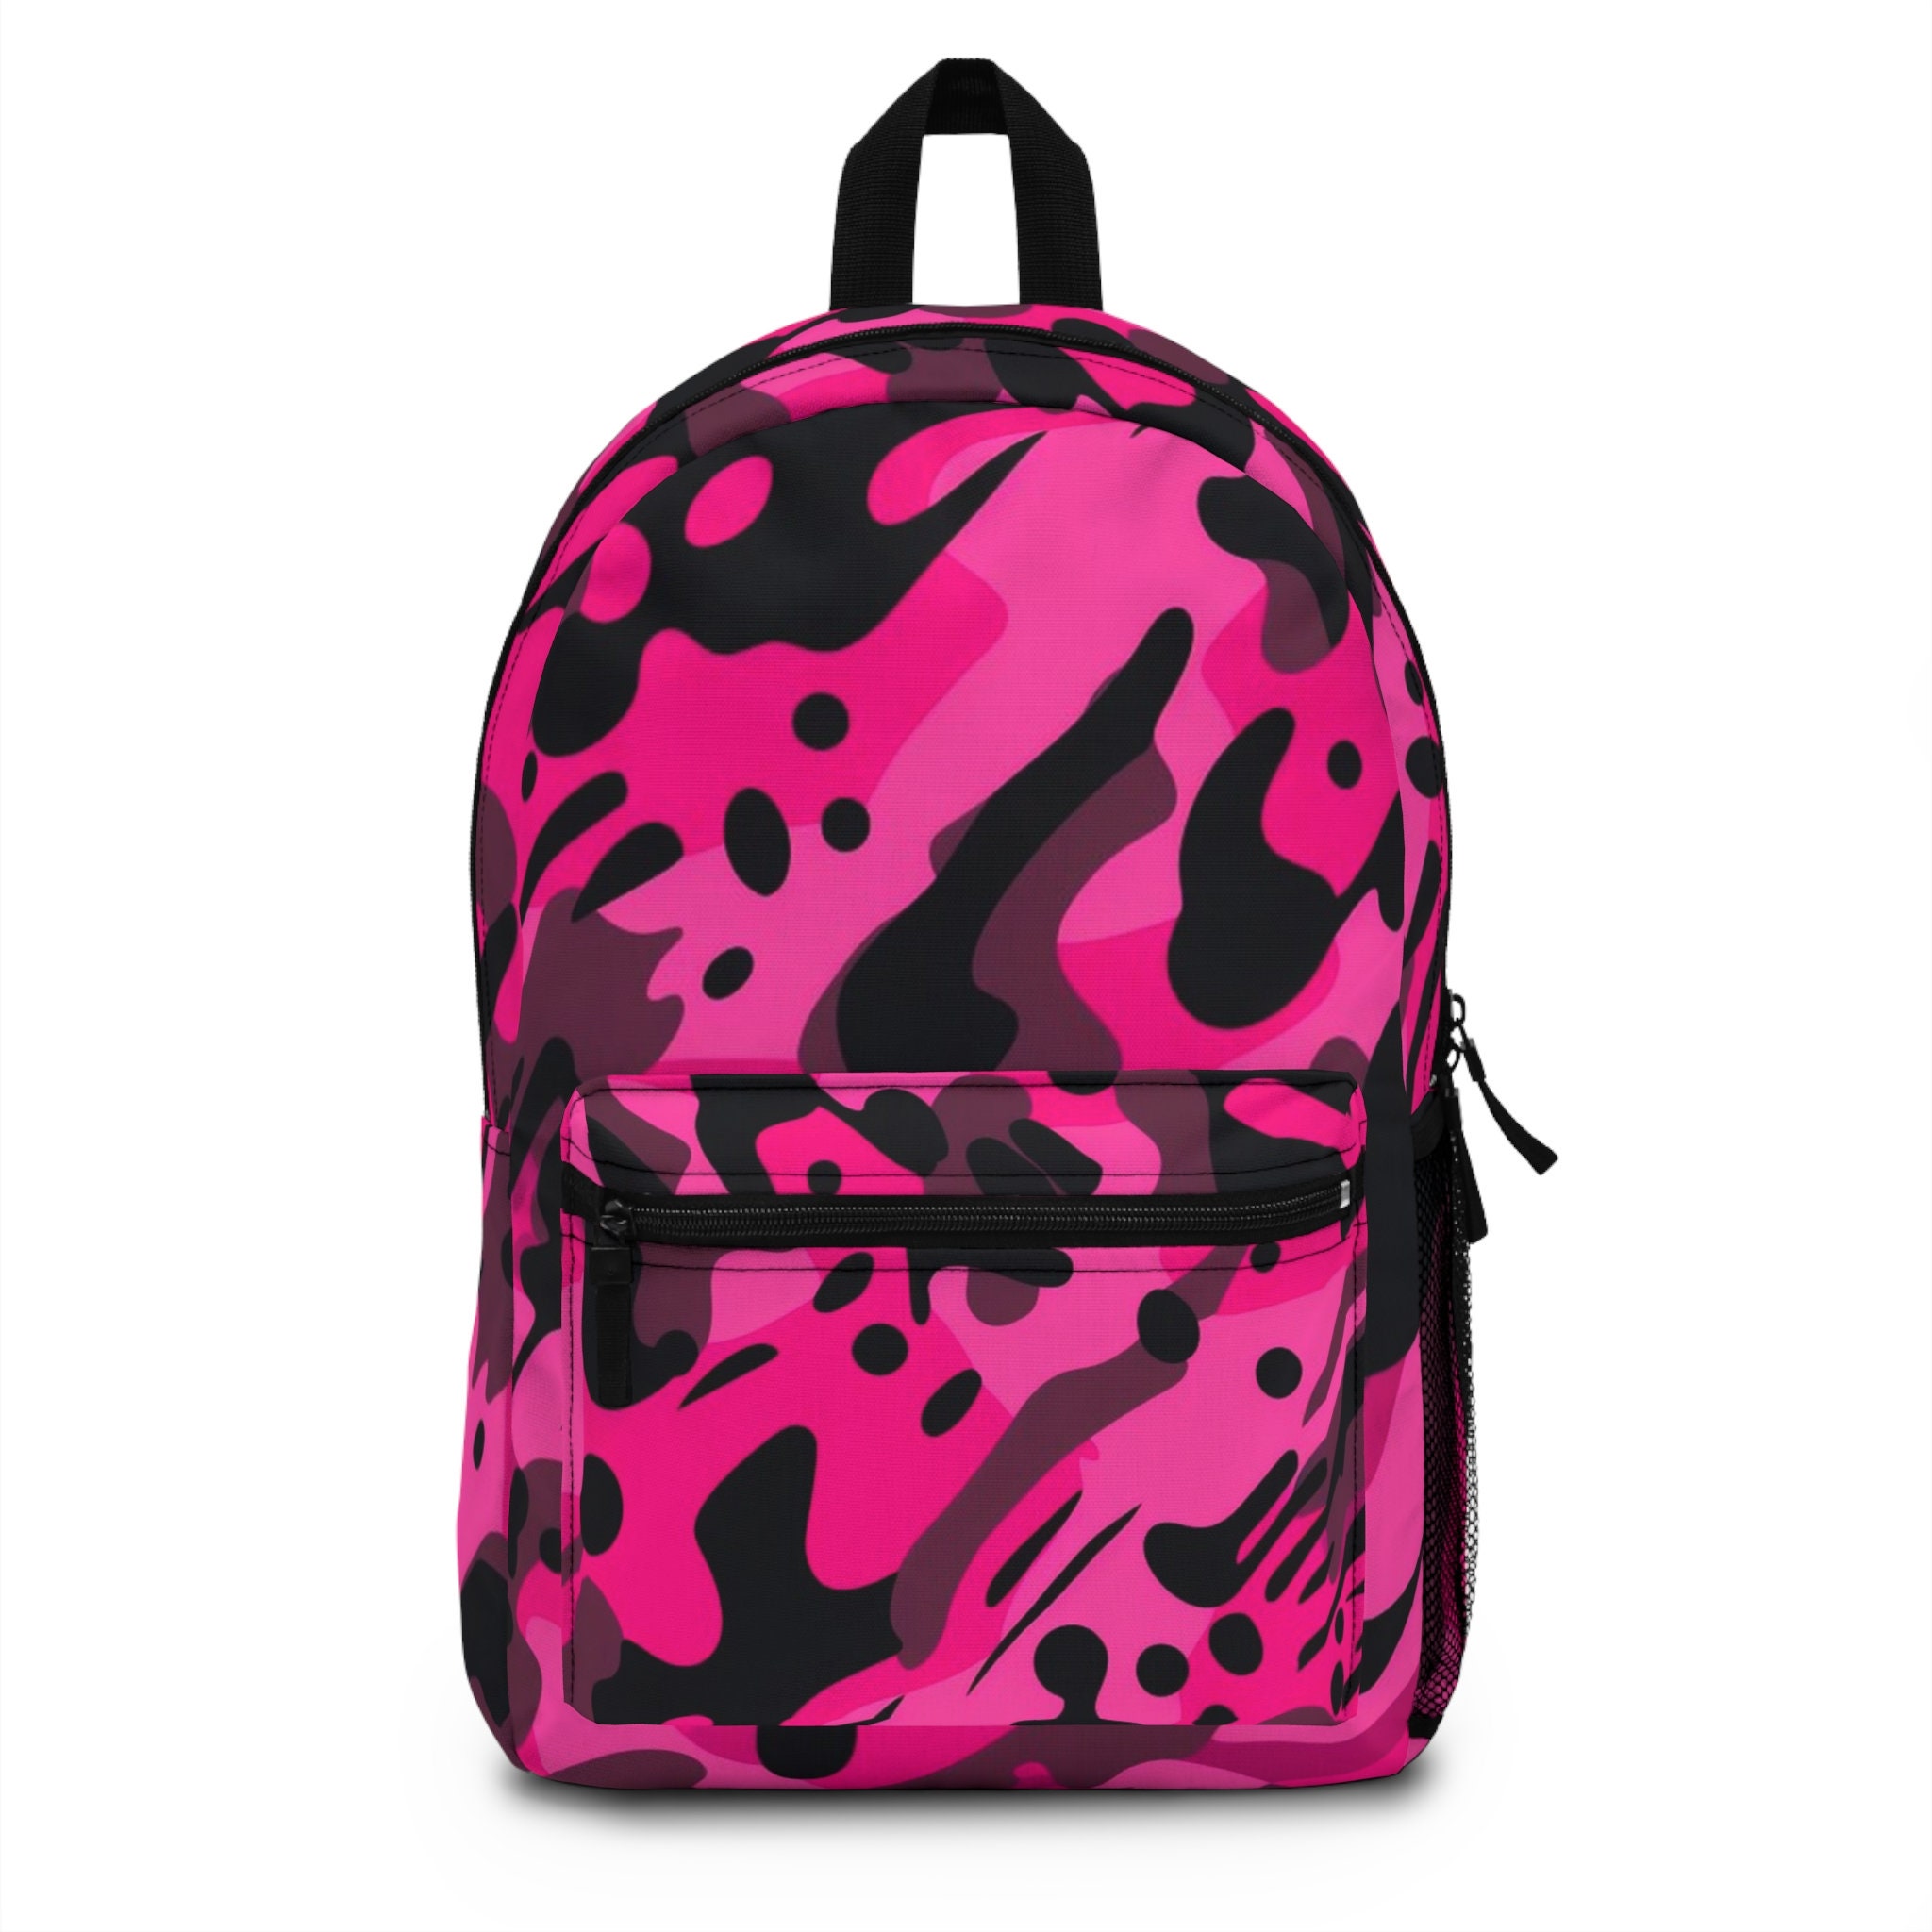 AIRPO Funny Camo Shark Backpacks Bright Pink Camouflage Large Capacity  Laptop Daypack Lightweight Backpack Travel Hiking Bag For Women Men